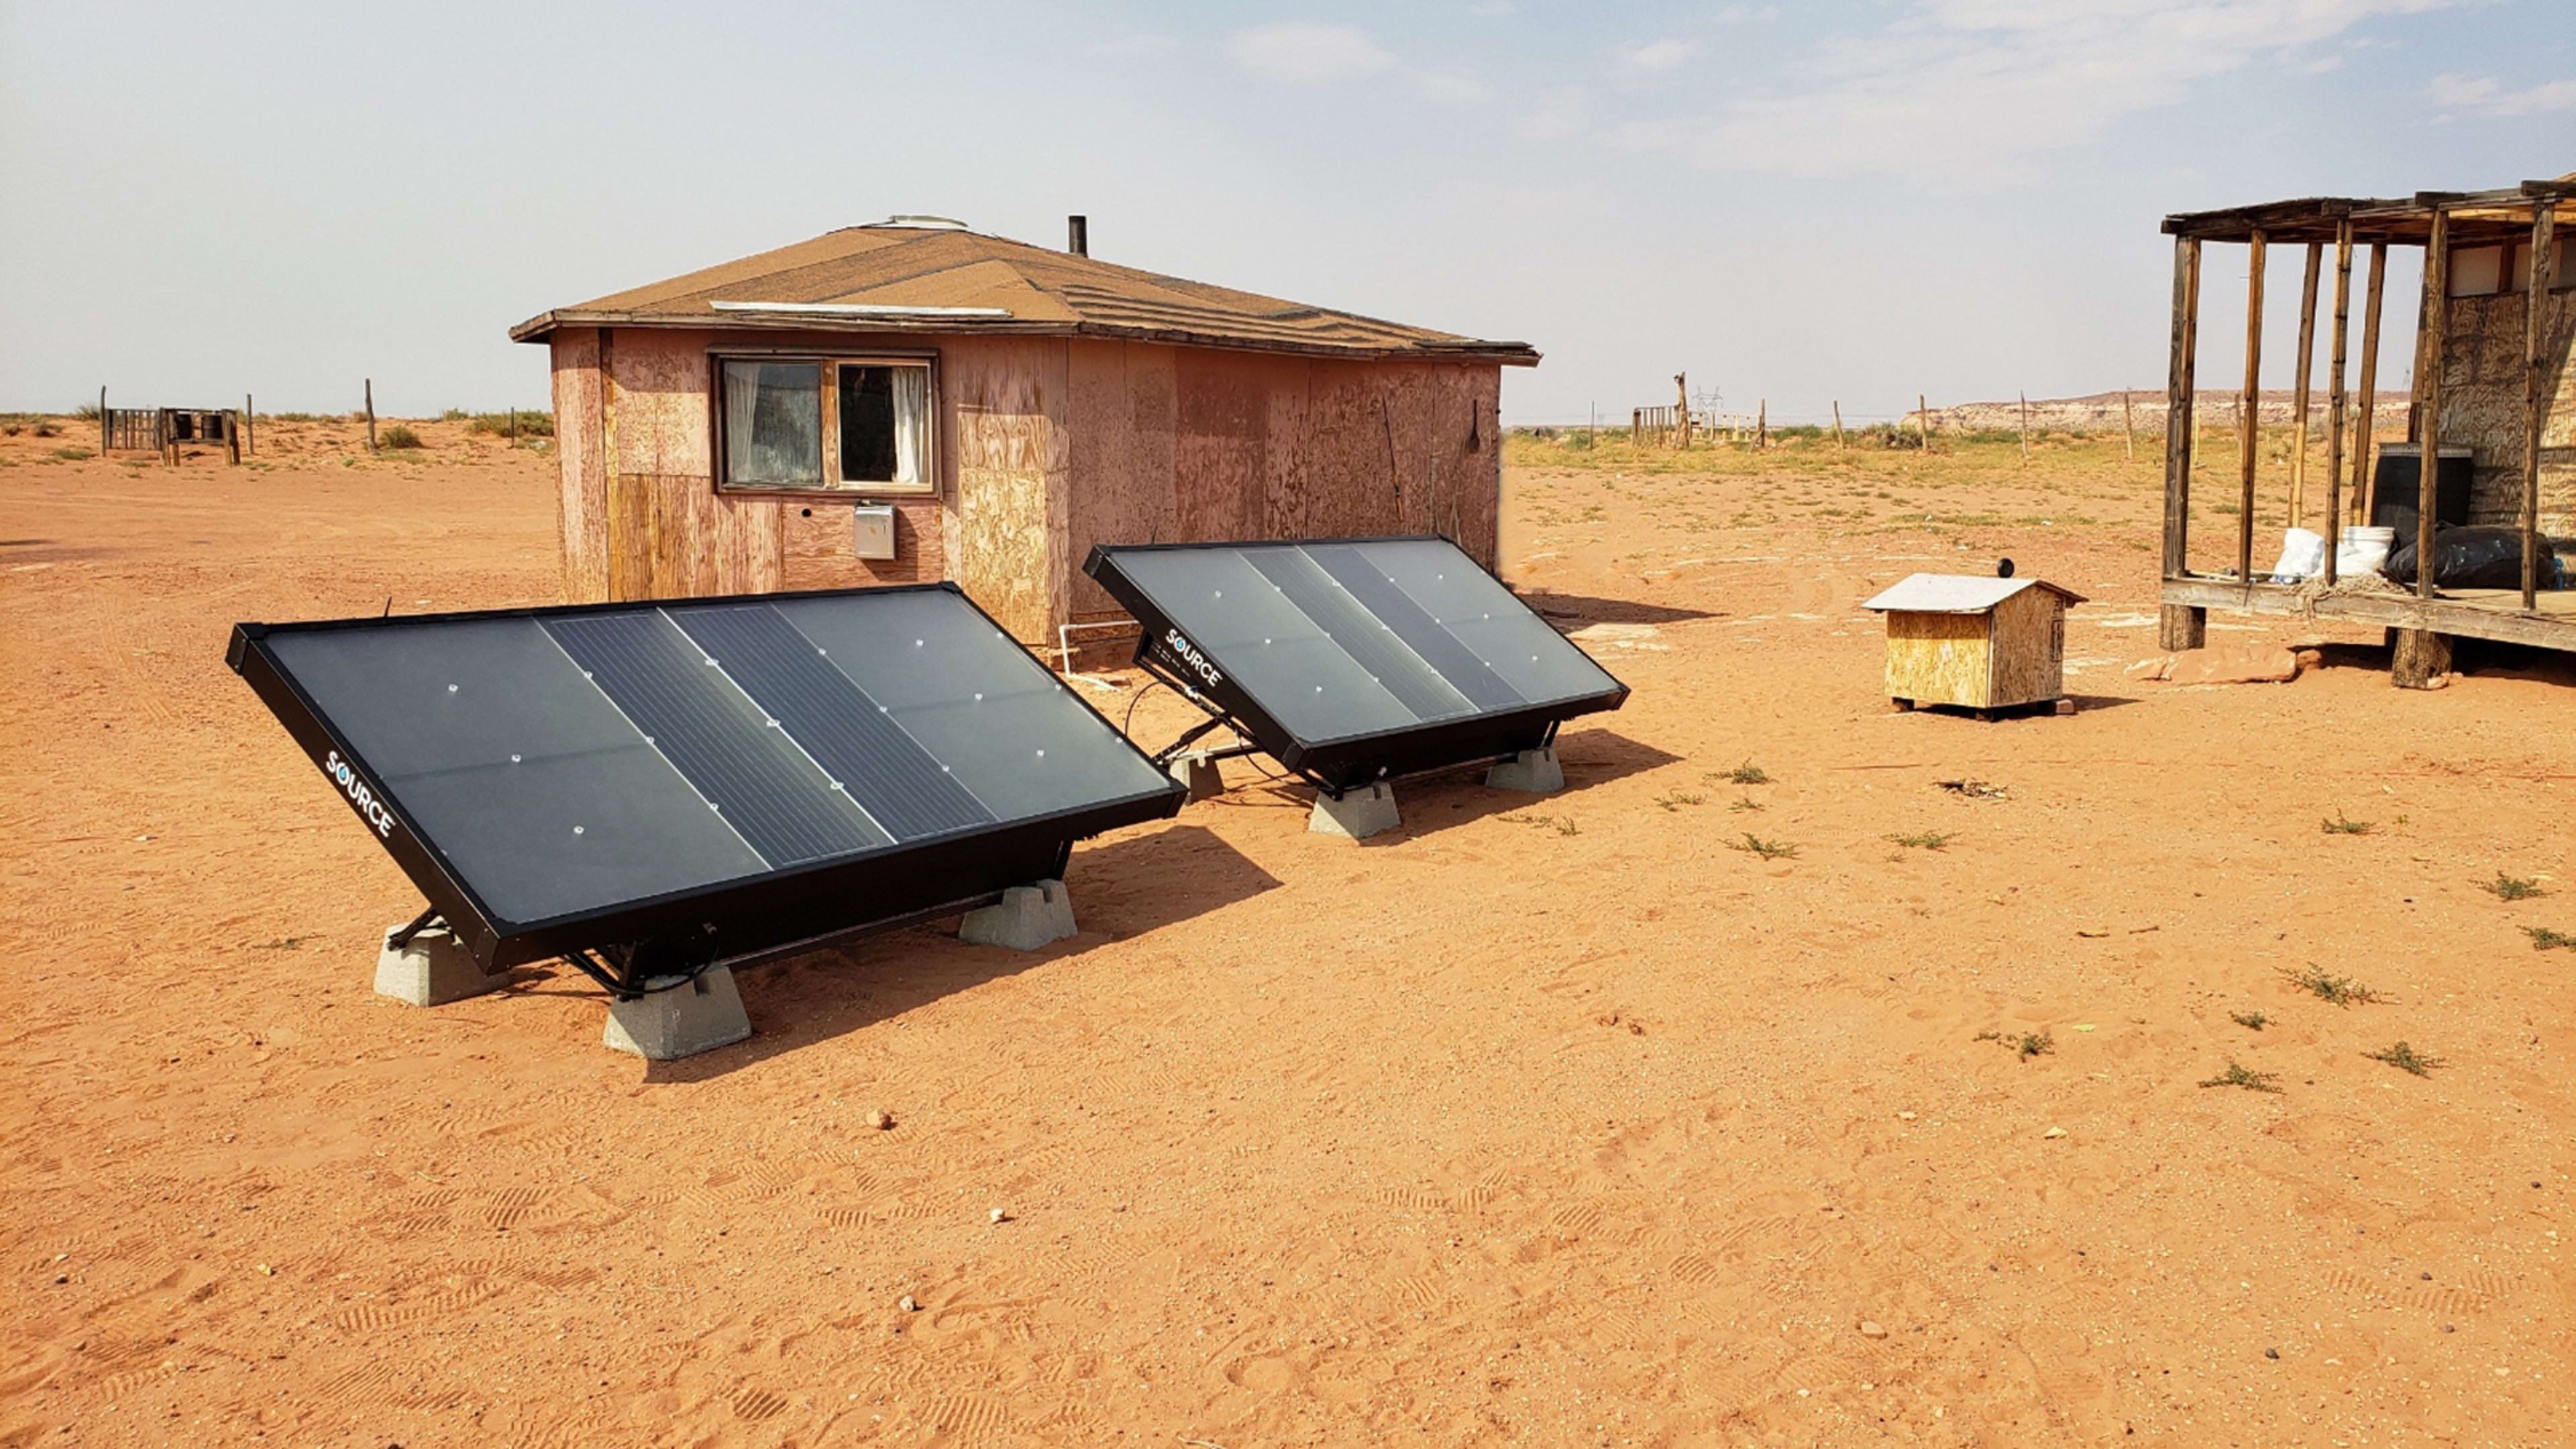 In places where water is hard to access, these panels can grab it from thin air